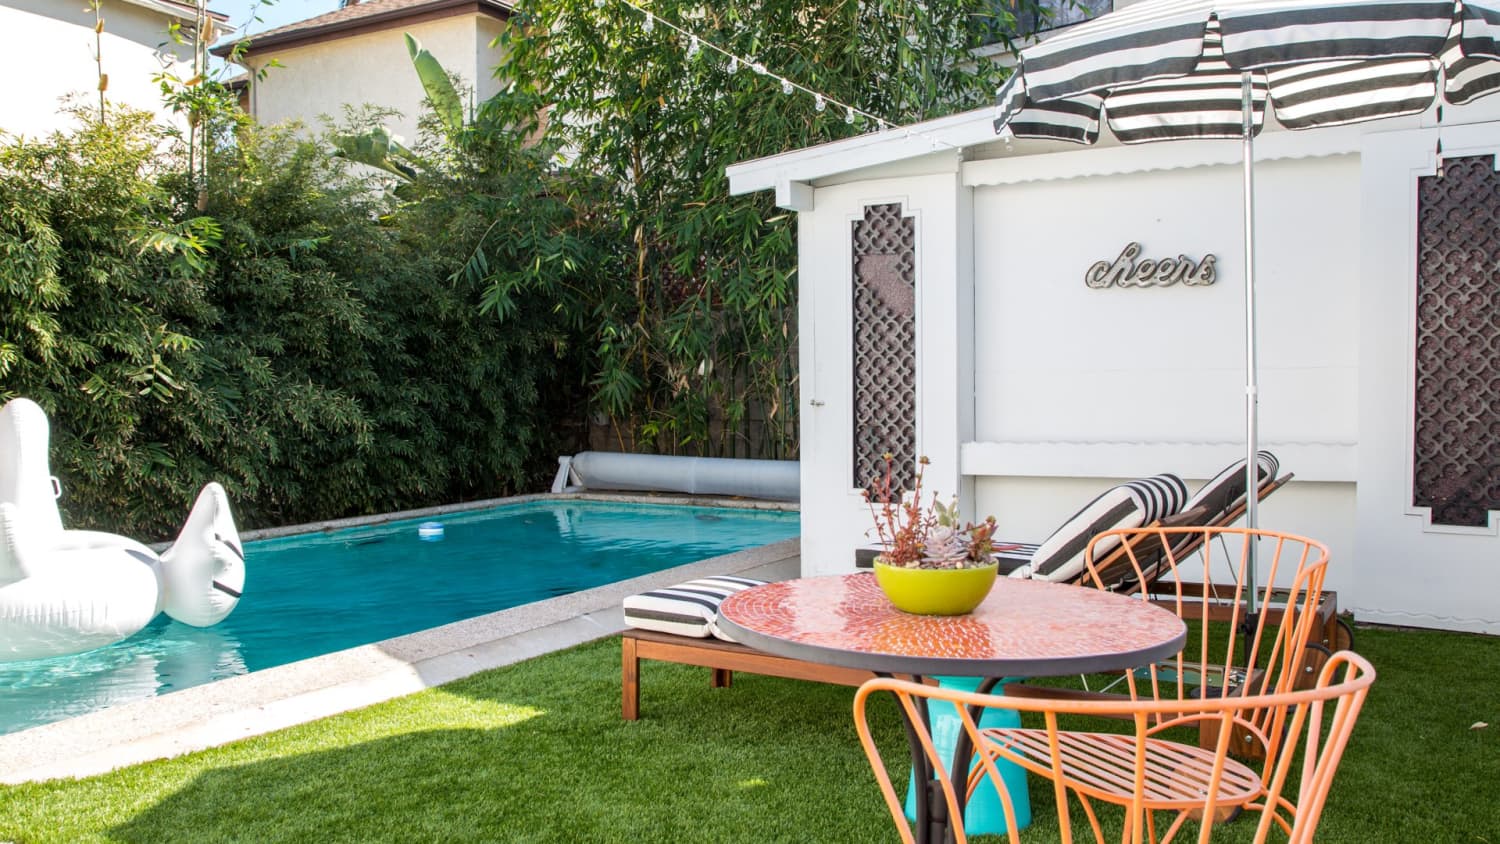 10 Small Backyard Pool Ideas How To Fit A Pool In A Small Yard Apartment Therapy